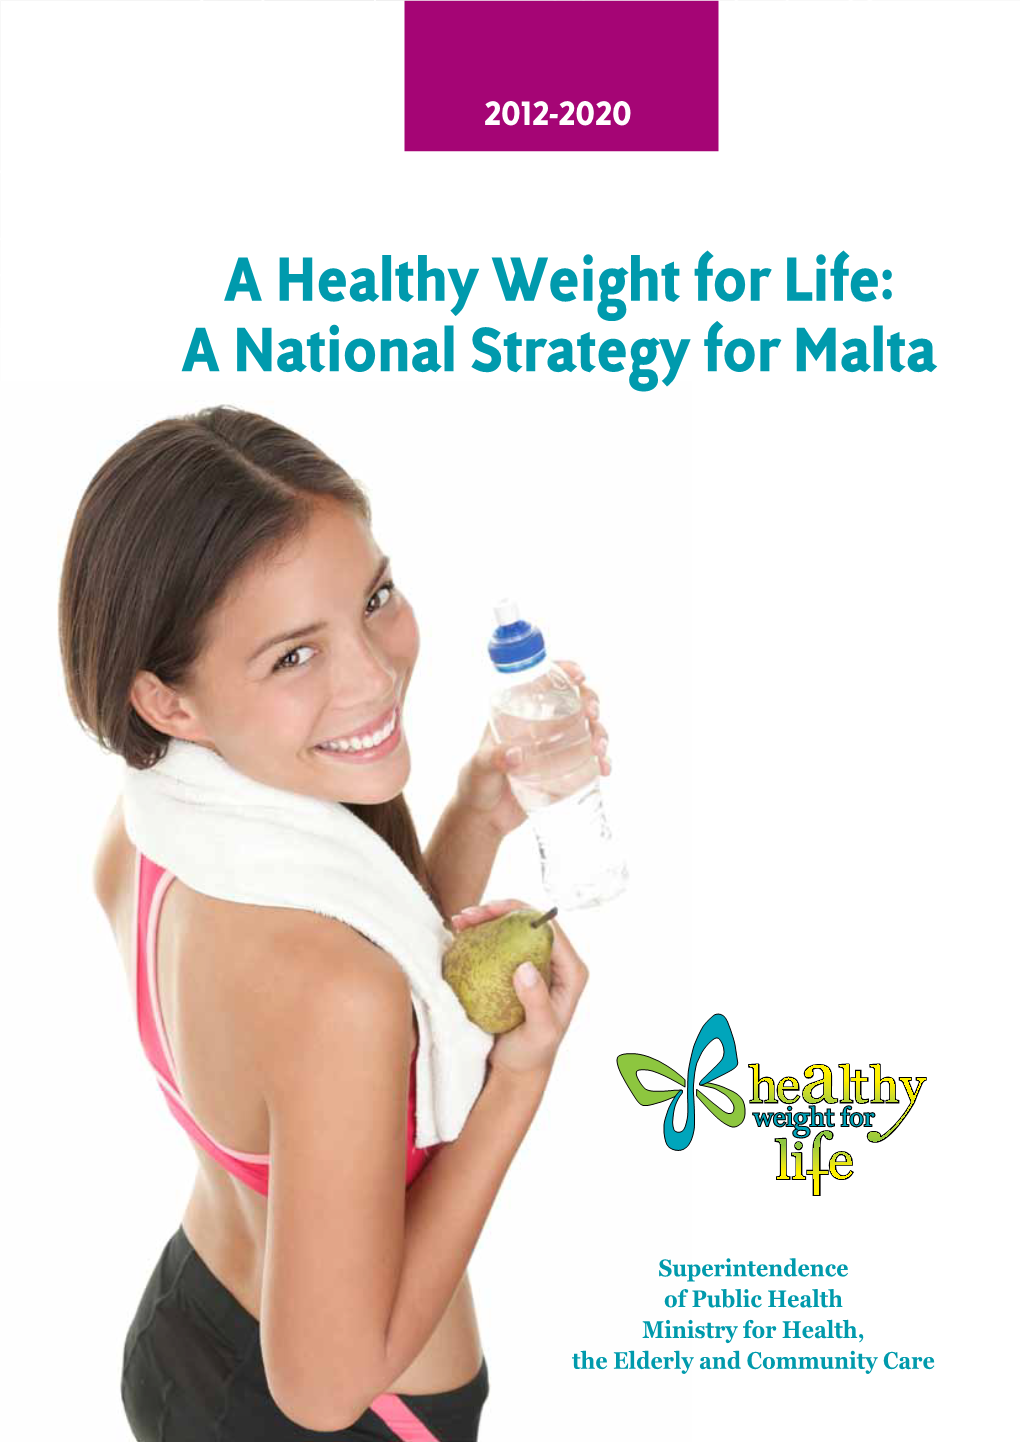 A Healthy Weight for Life: a National Strategy for Malta